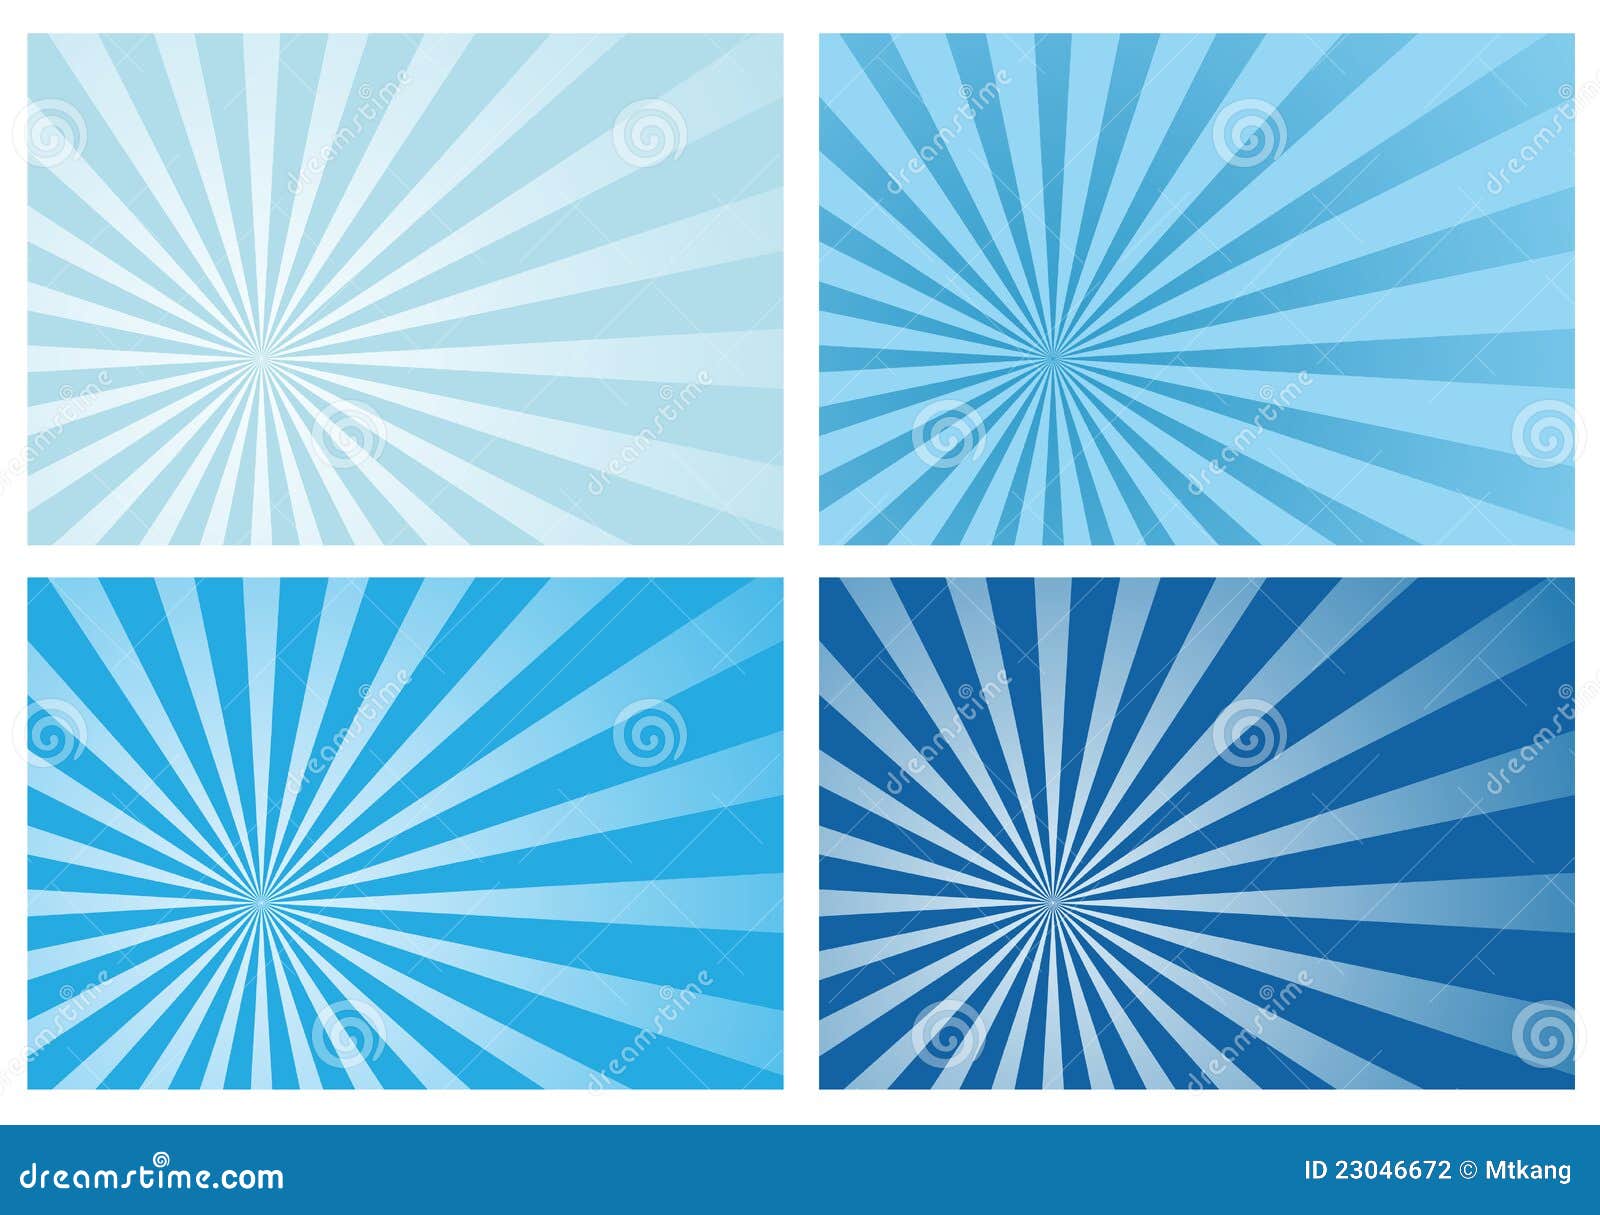 blue ray sunburst background. Blue burst rays background, eps10 format, preserve transparency and opacity mask for easy color changing, position of the burst and fading effects. A clipping mask is used.